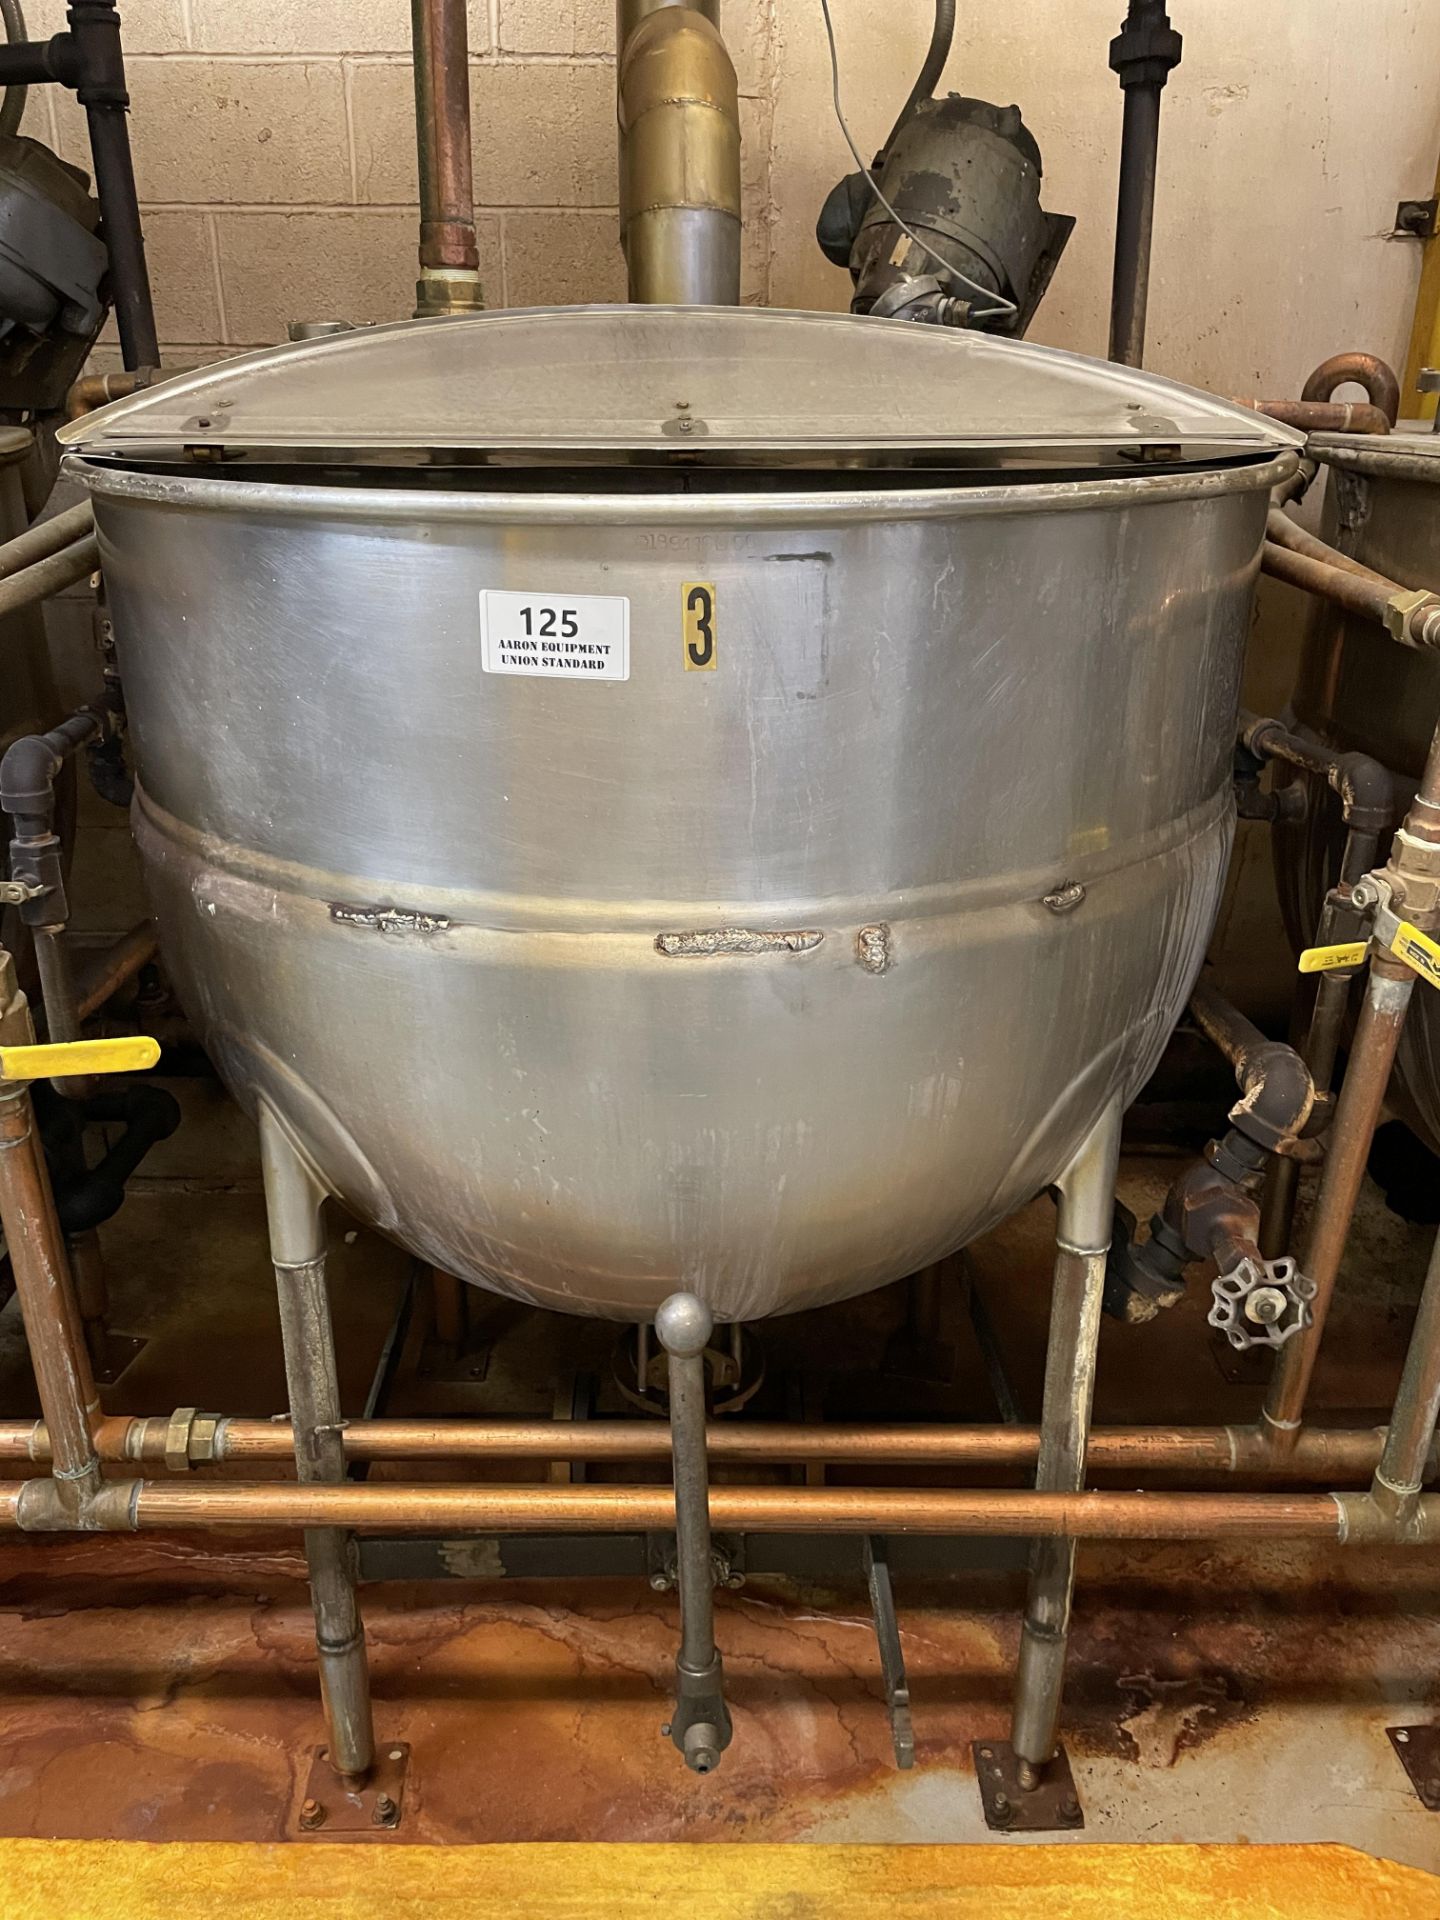 Asset 125 - 150 Gallon Stainless Steel jacketed Kettle, 43" diameter x 32" with Propellor type